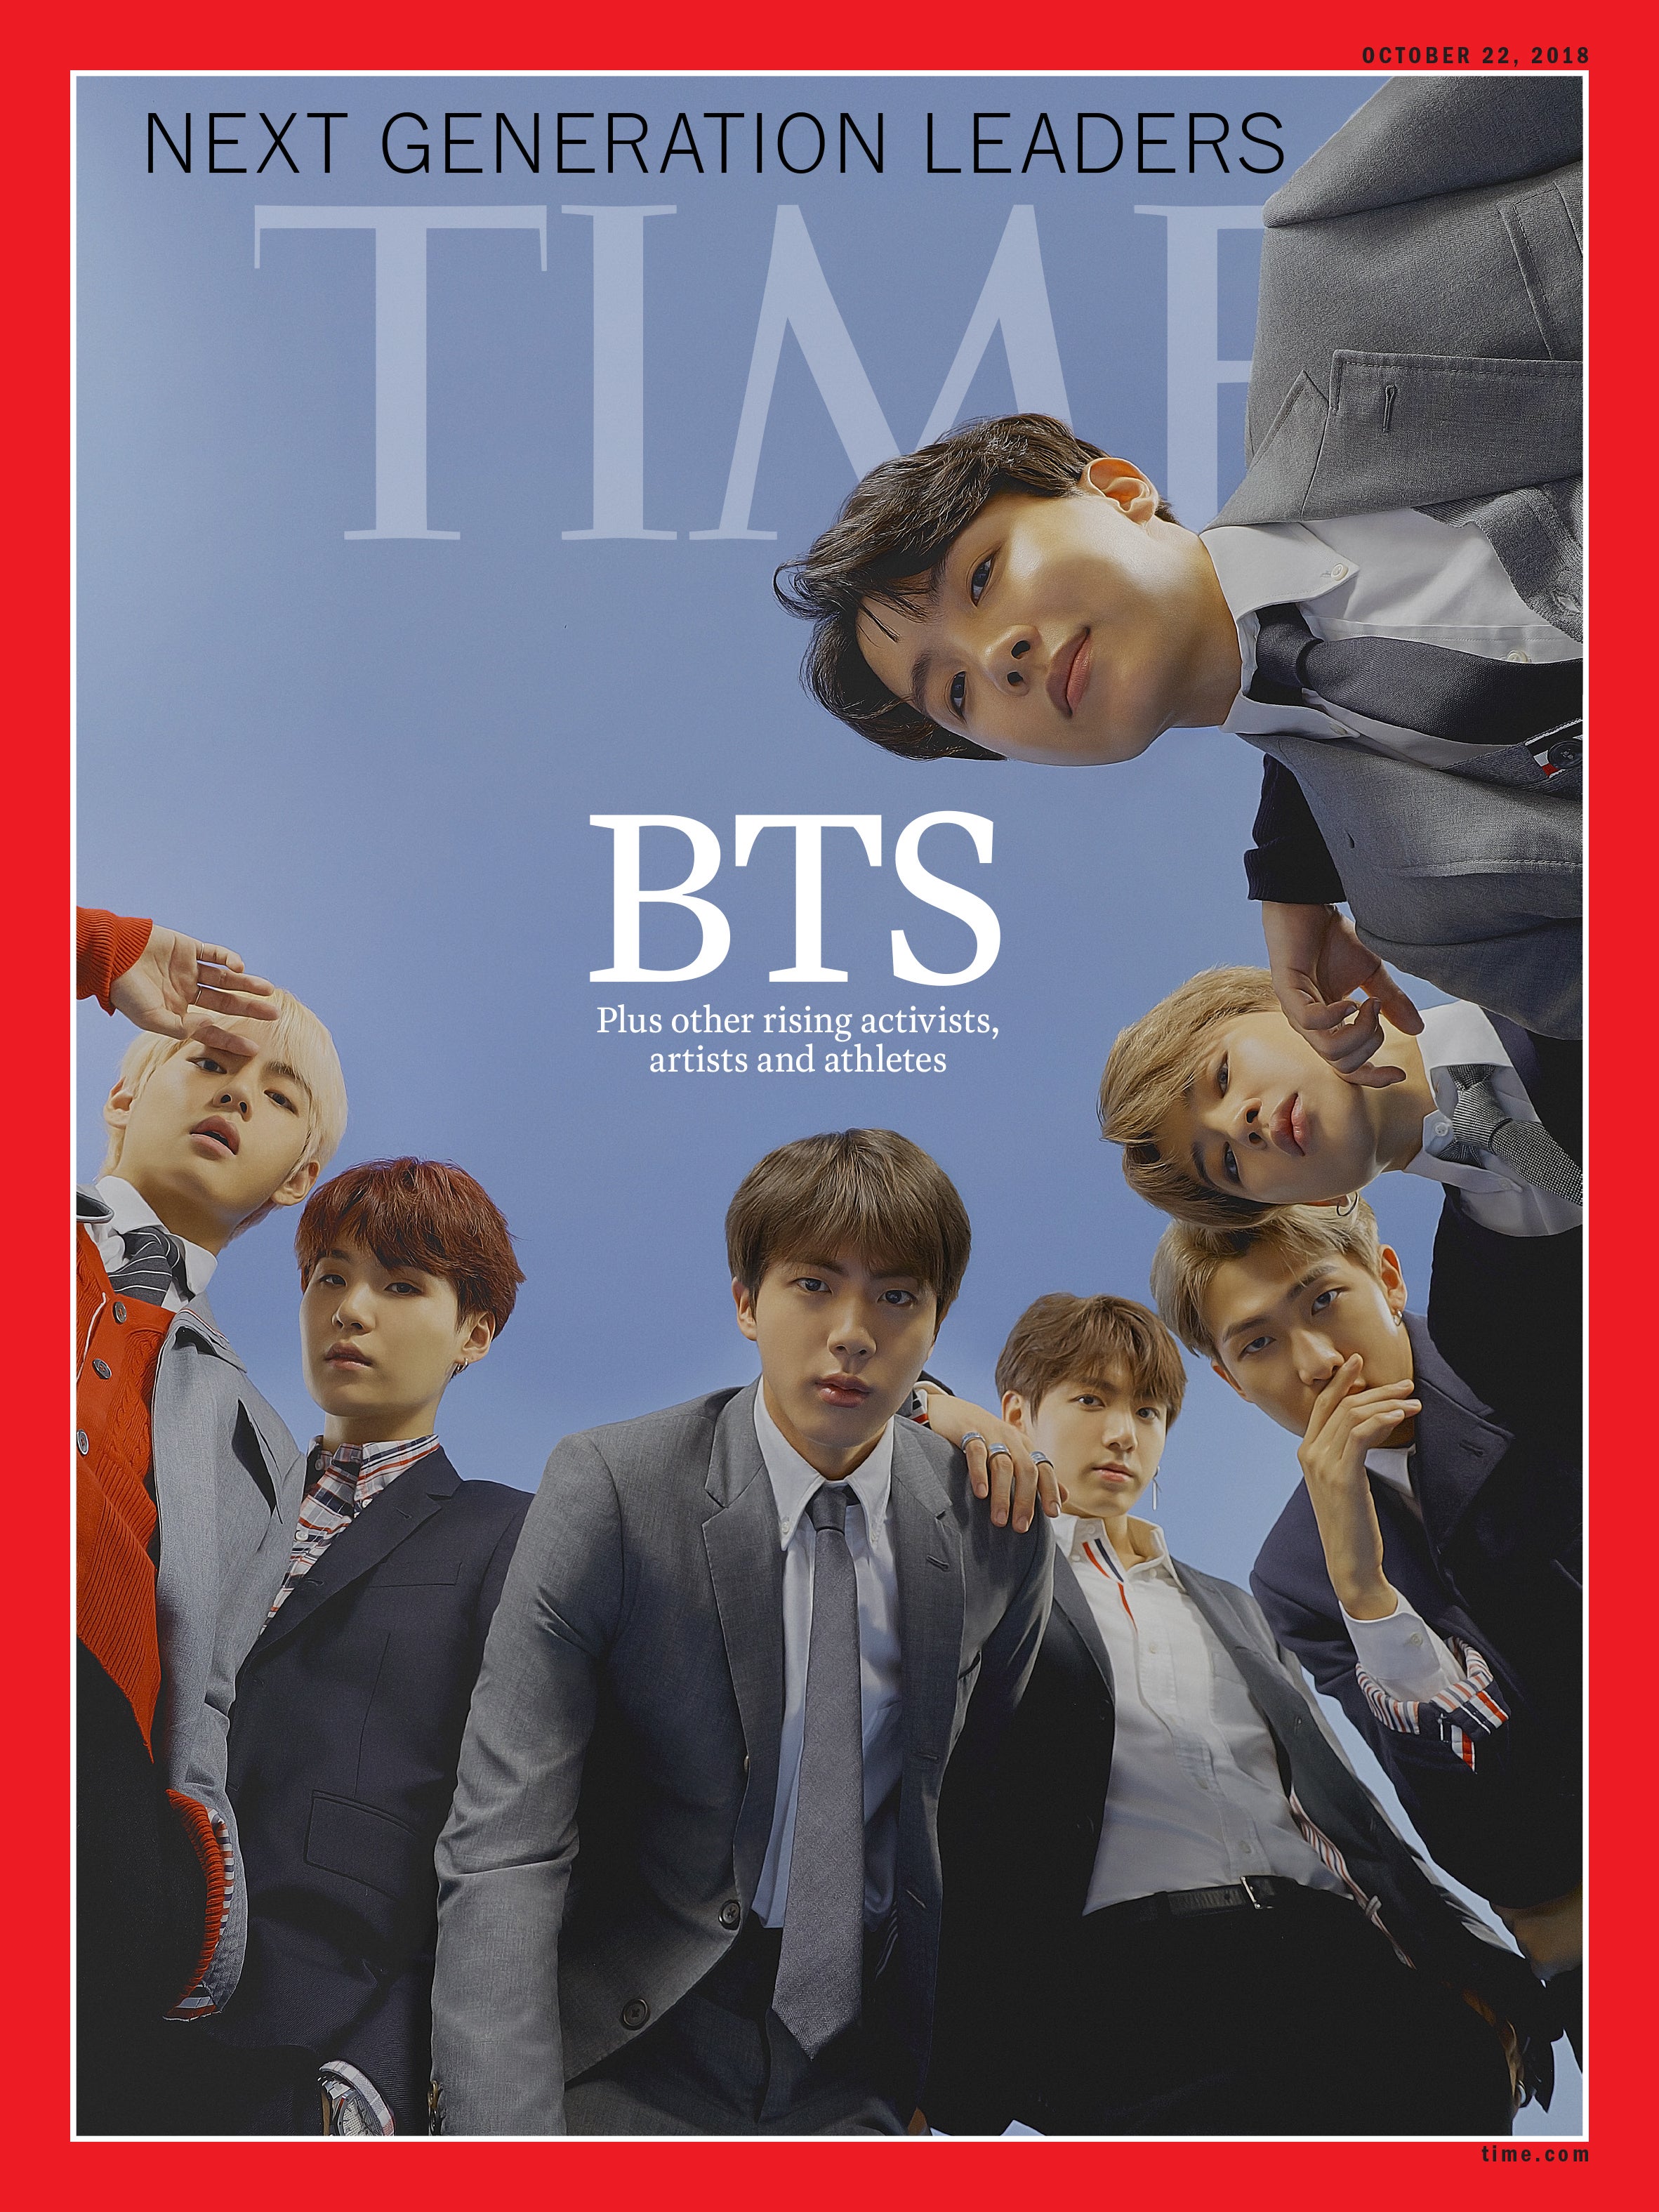 BTS Honored as 'Time' Magazine's 'Next Generation Leaders